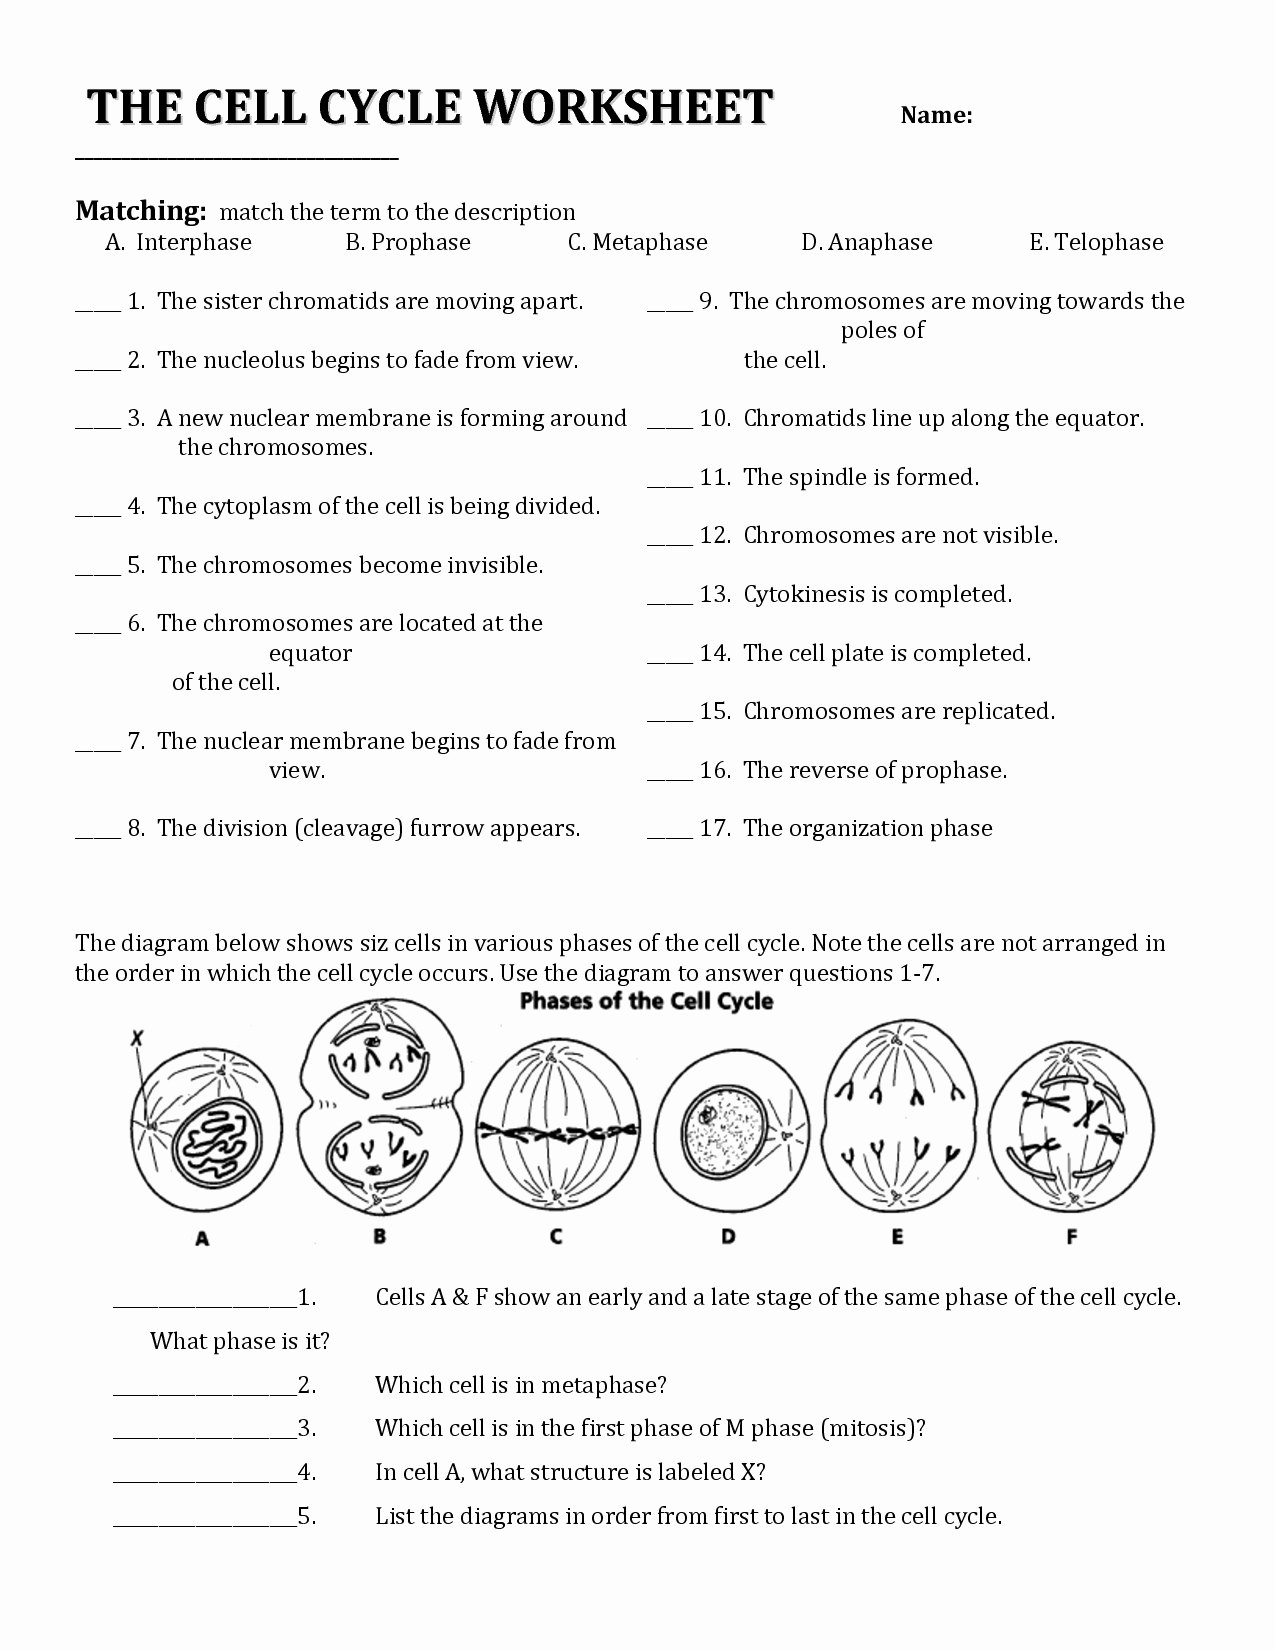 Cell Division Worksheet Answers Elegant Cell Division and the Cell Cycle Worksheet Cell Division